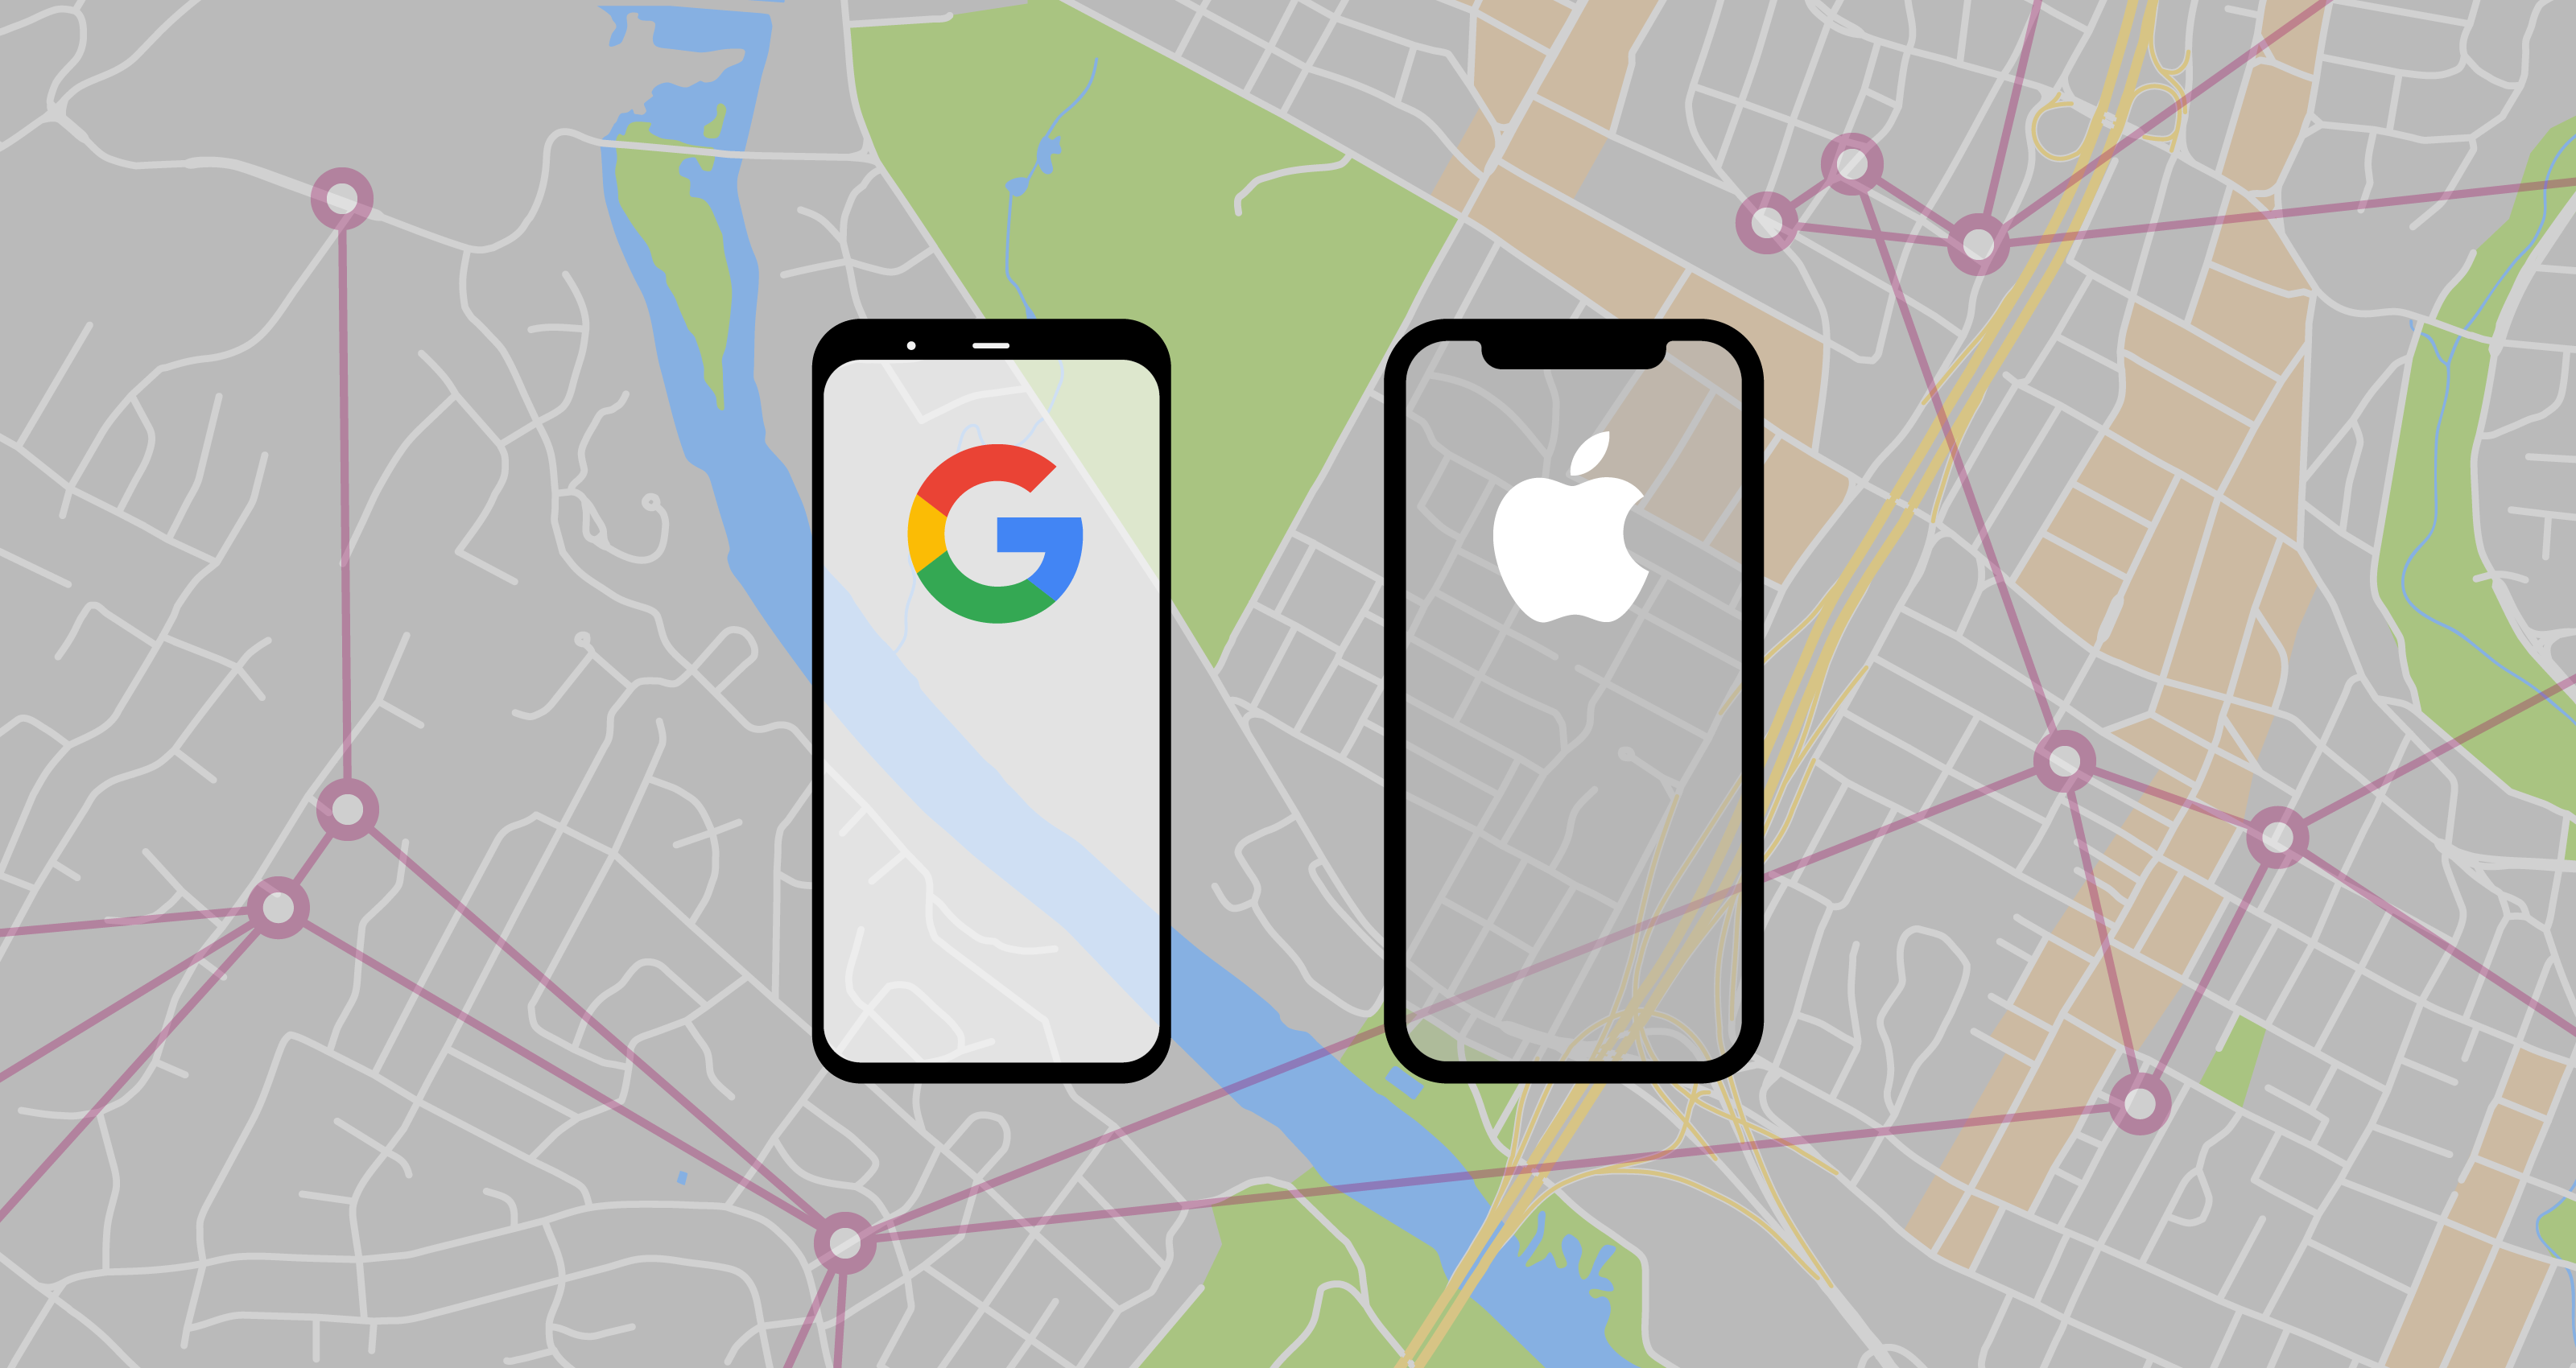 Apple and Google partner on COVID-19 contact tracing technology - Apple